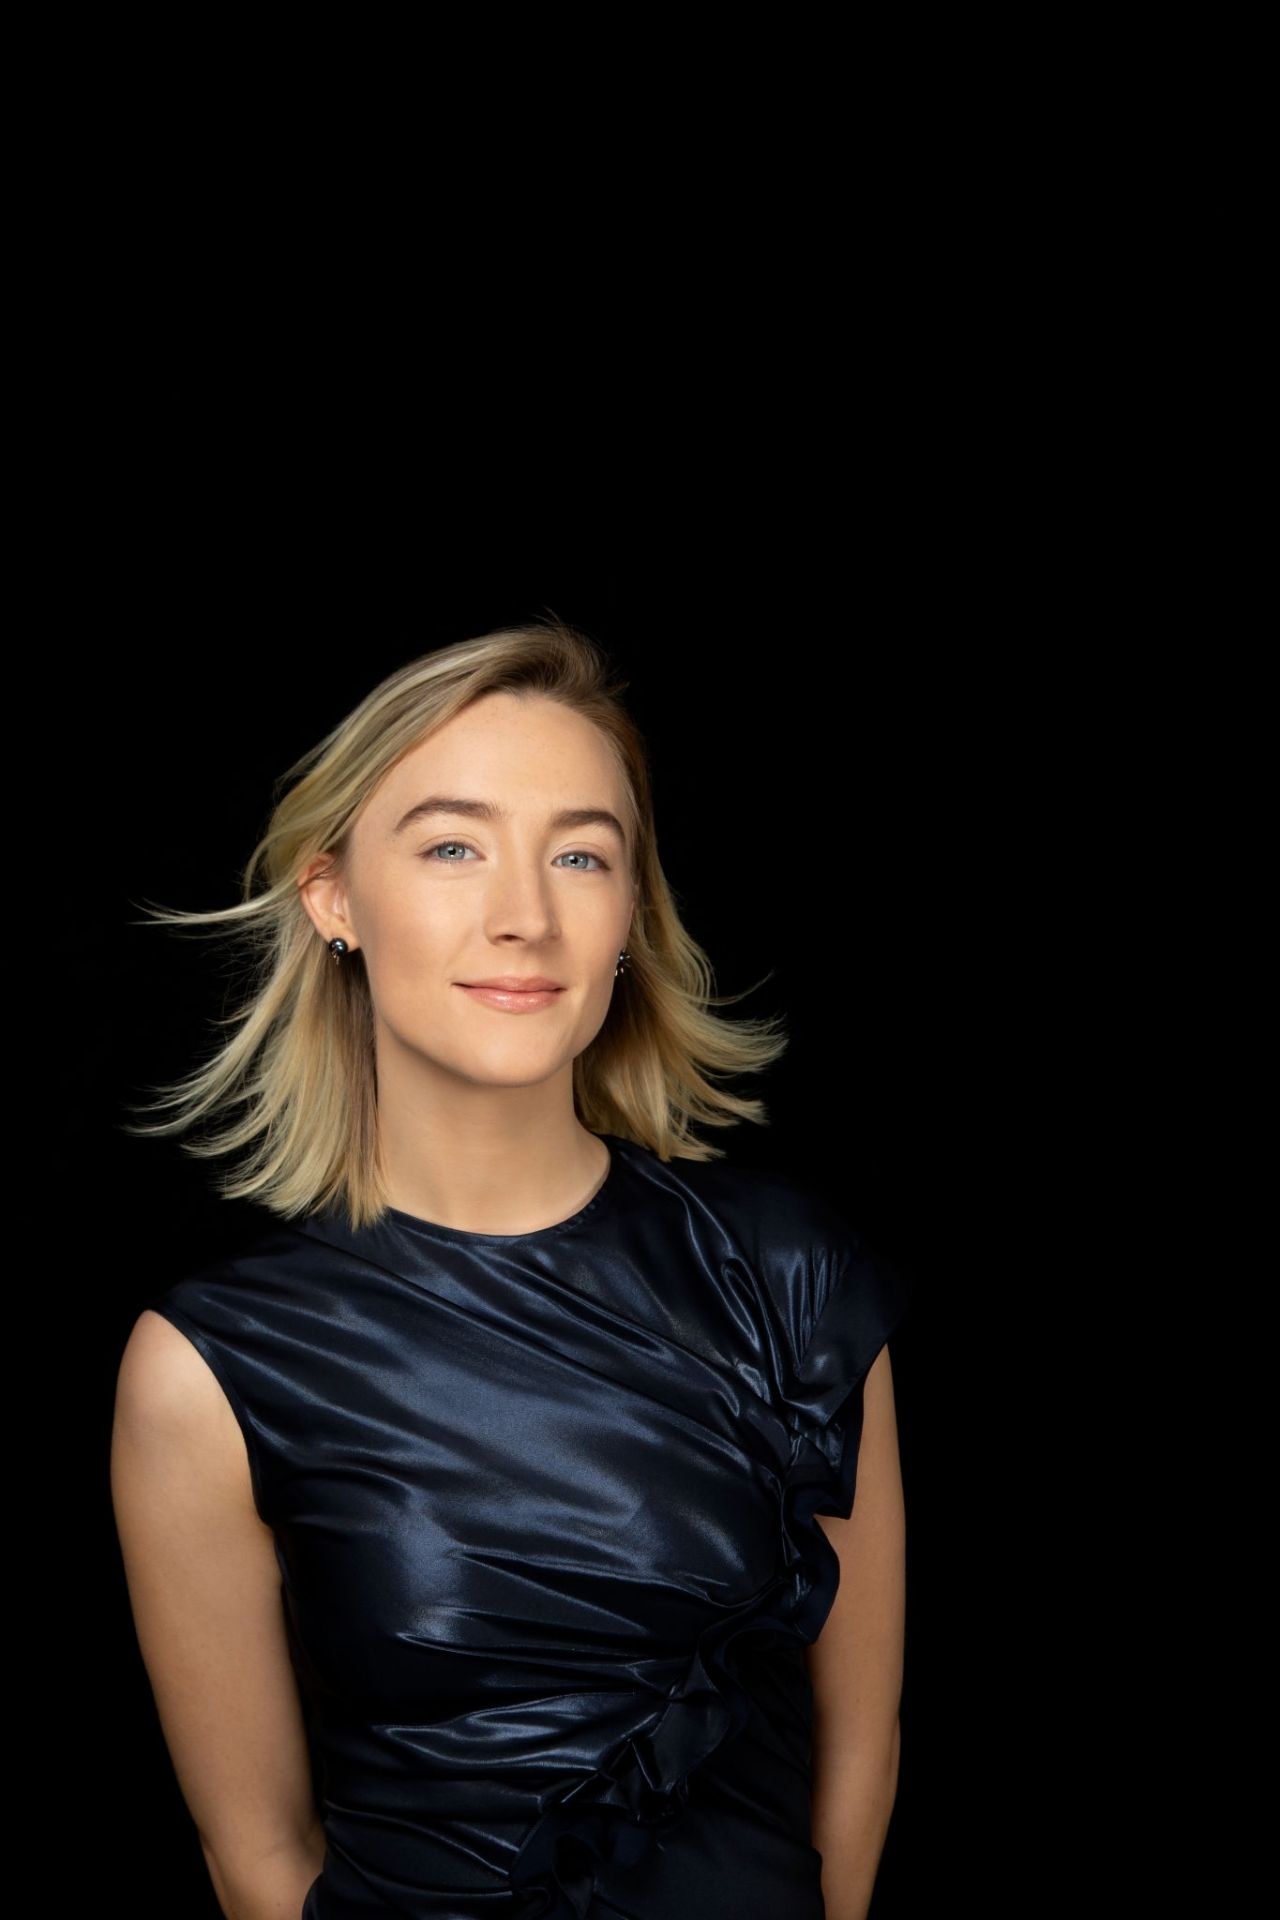 saoirse-ronan-photoshoot-for-la-times-actresses-roundtable-december-2018-0.jpg